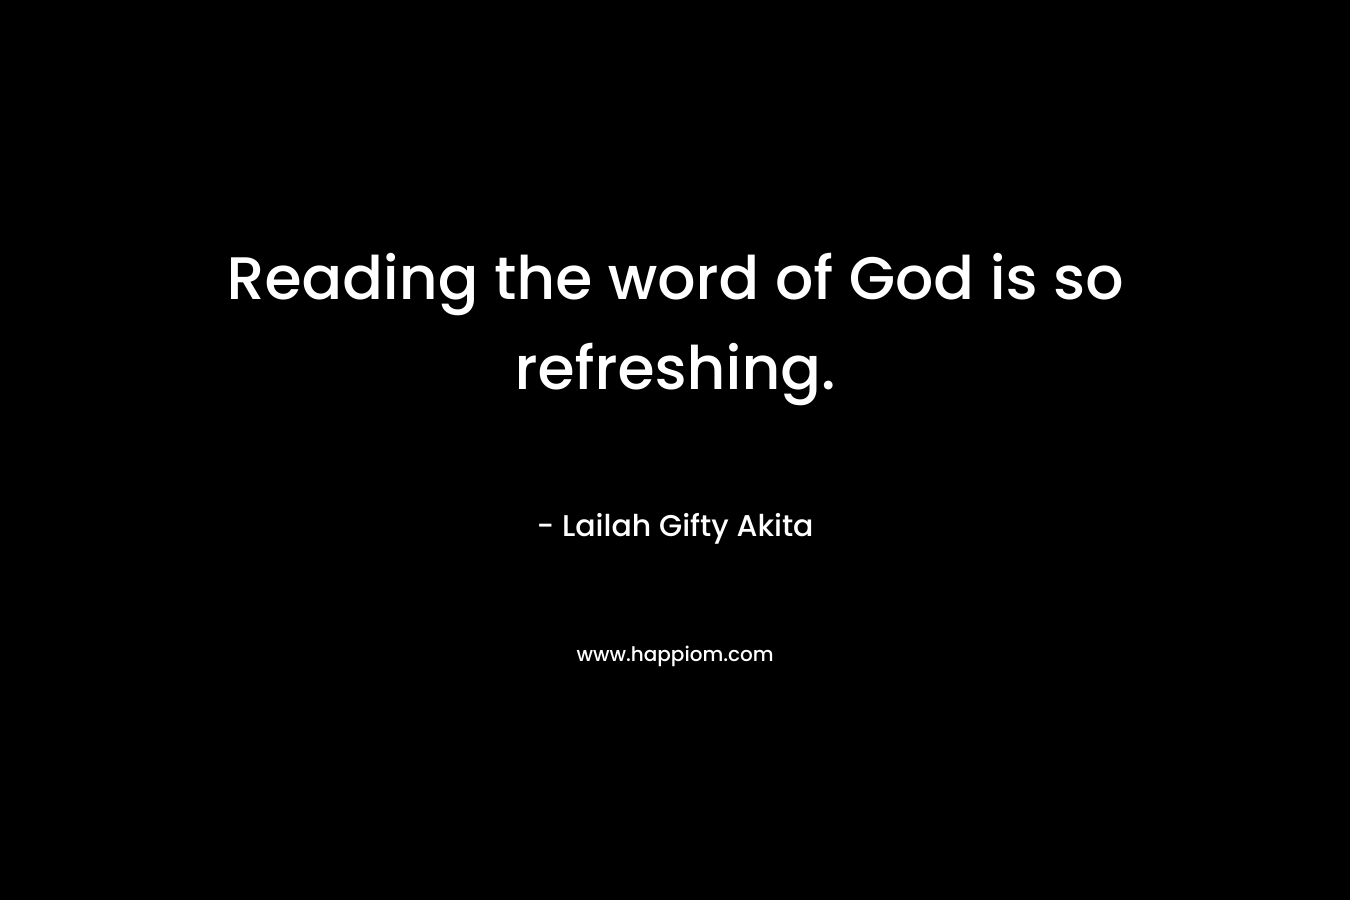 Reading the word of God is so refreshing. – Lailah Gifty Akita